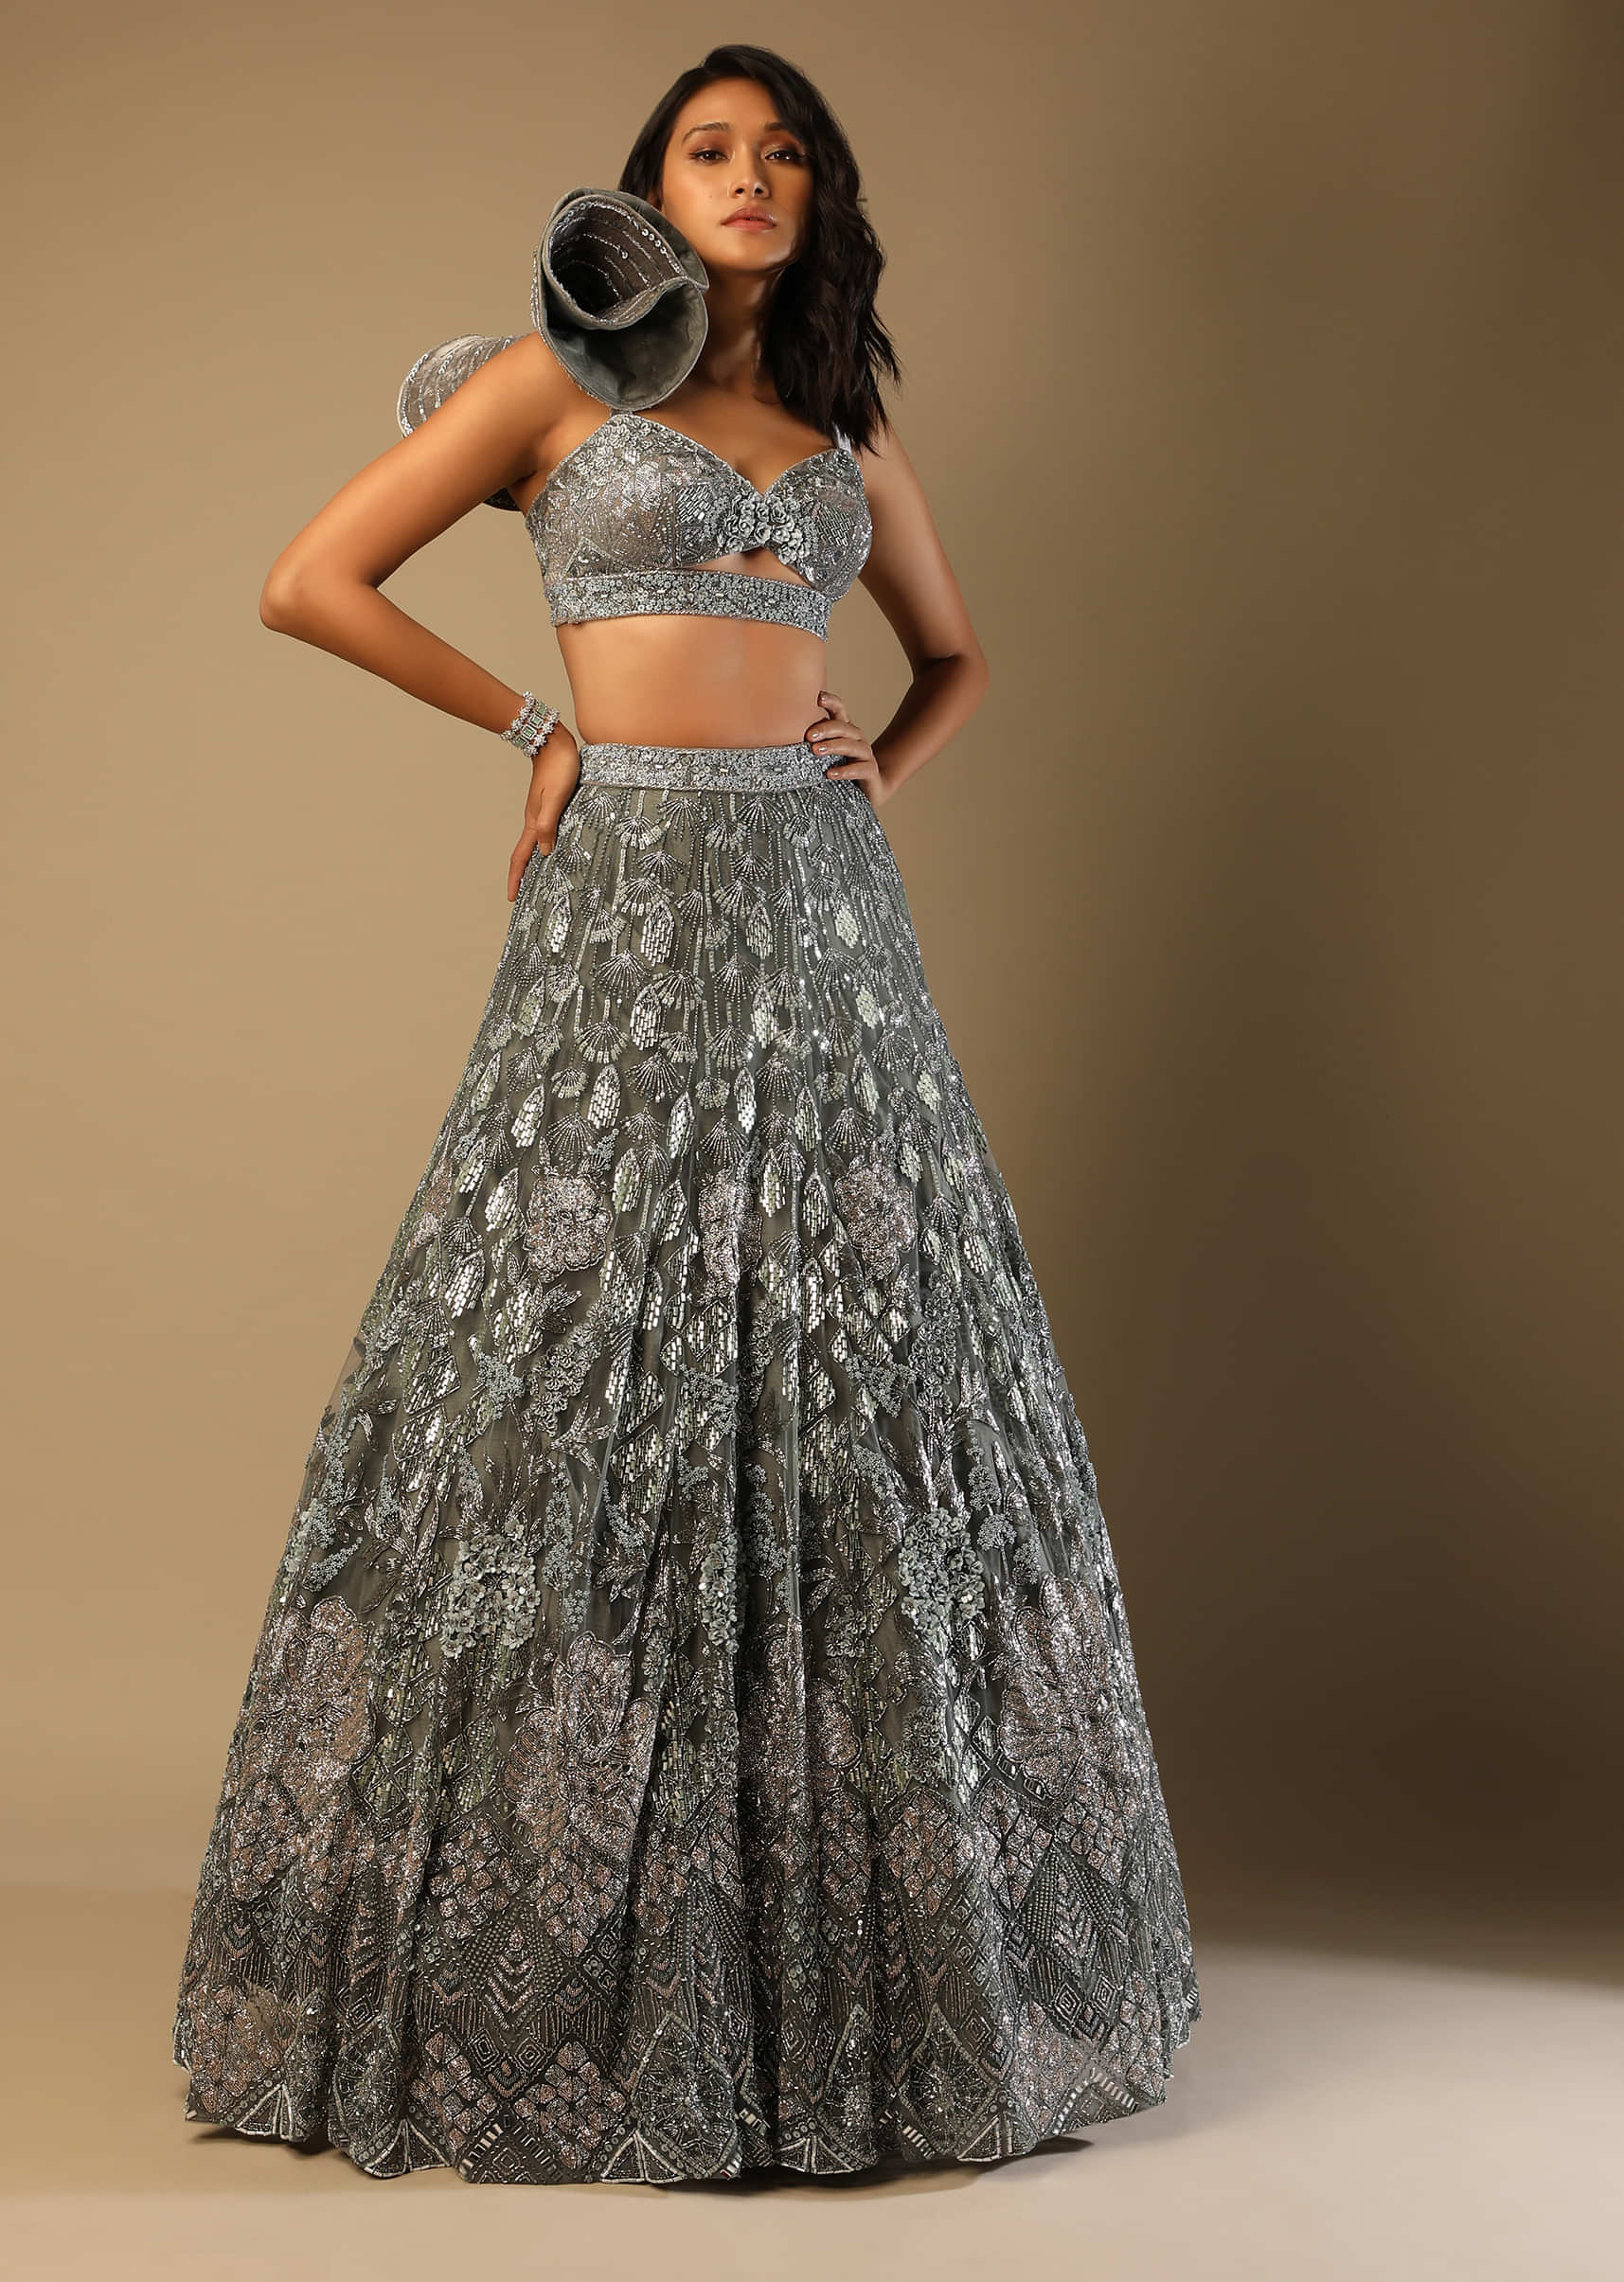 Fern Green Lehenga Choli In Net With Stone Hand Embroidered Floral Motifs And Fancy Origami Cones On The Shoulder 